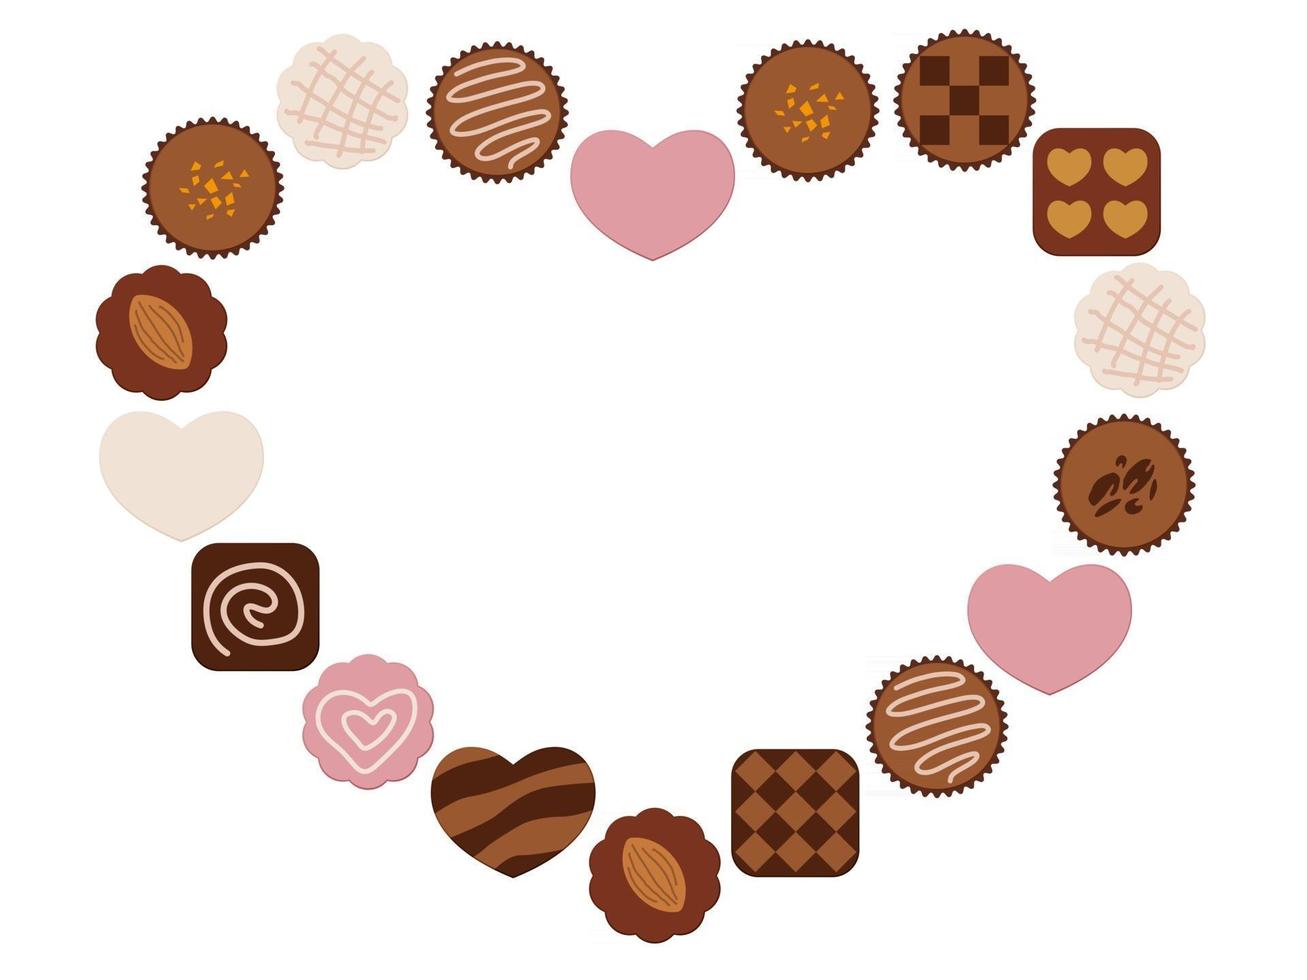 Variety Of Chocolates Arranged As A Valentines Day Heart Shape Frame Isolated On A White Background vector